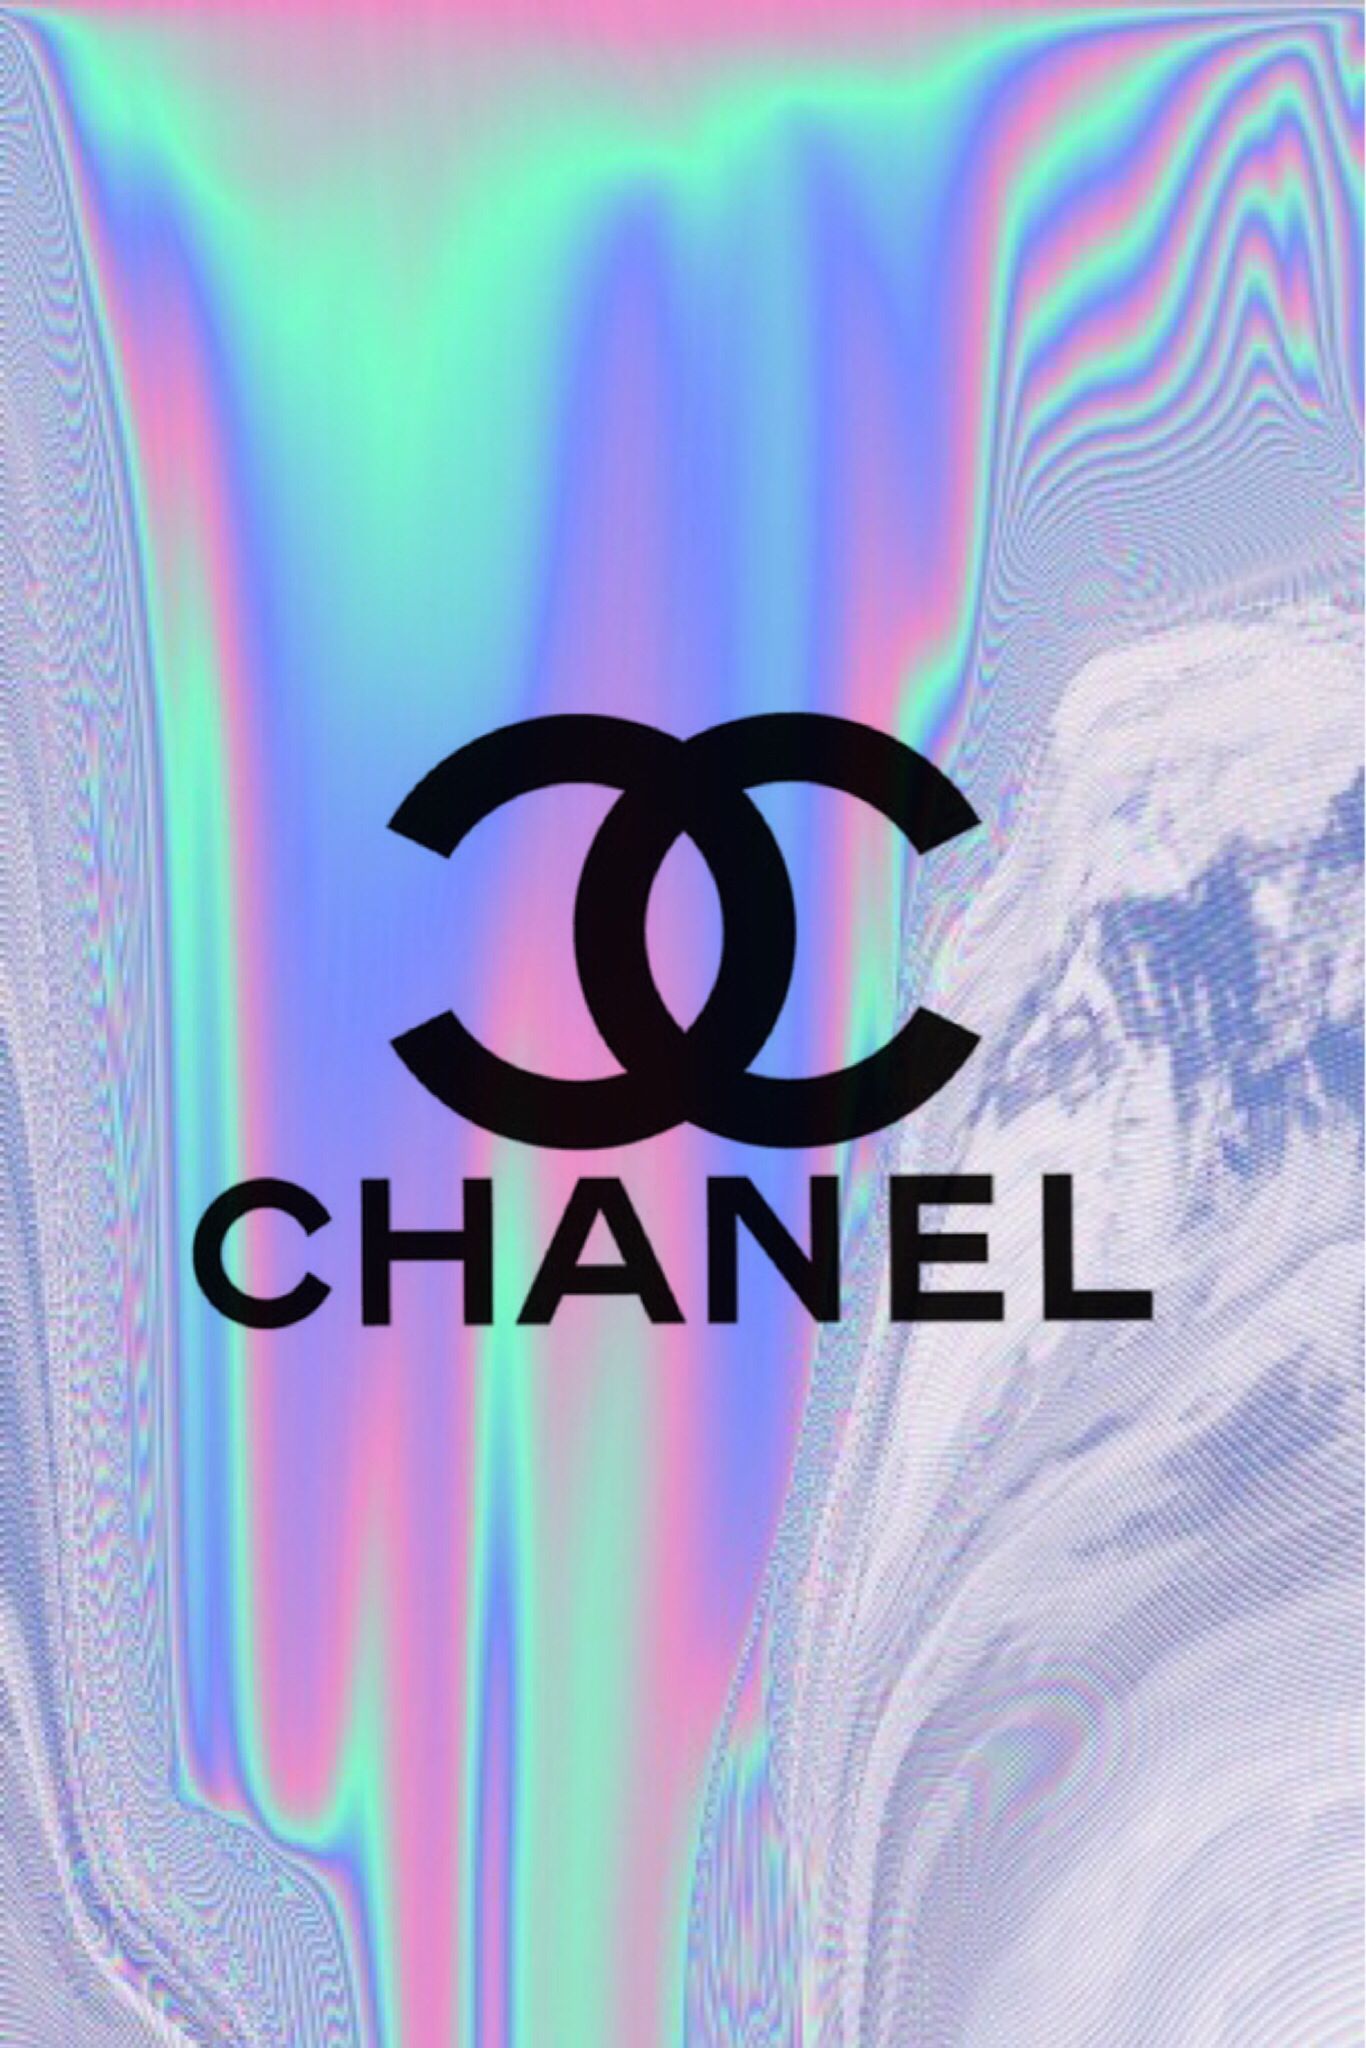 Chanel holographic background - Chanel